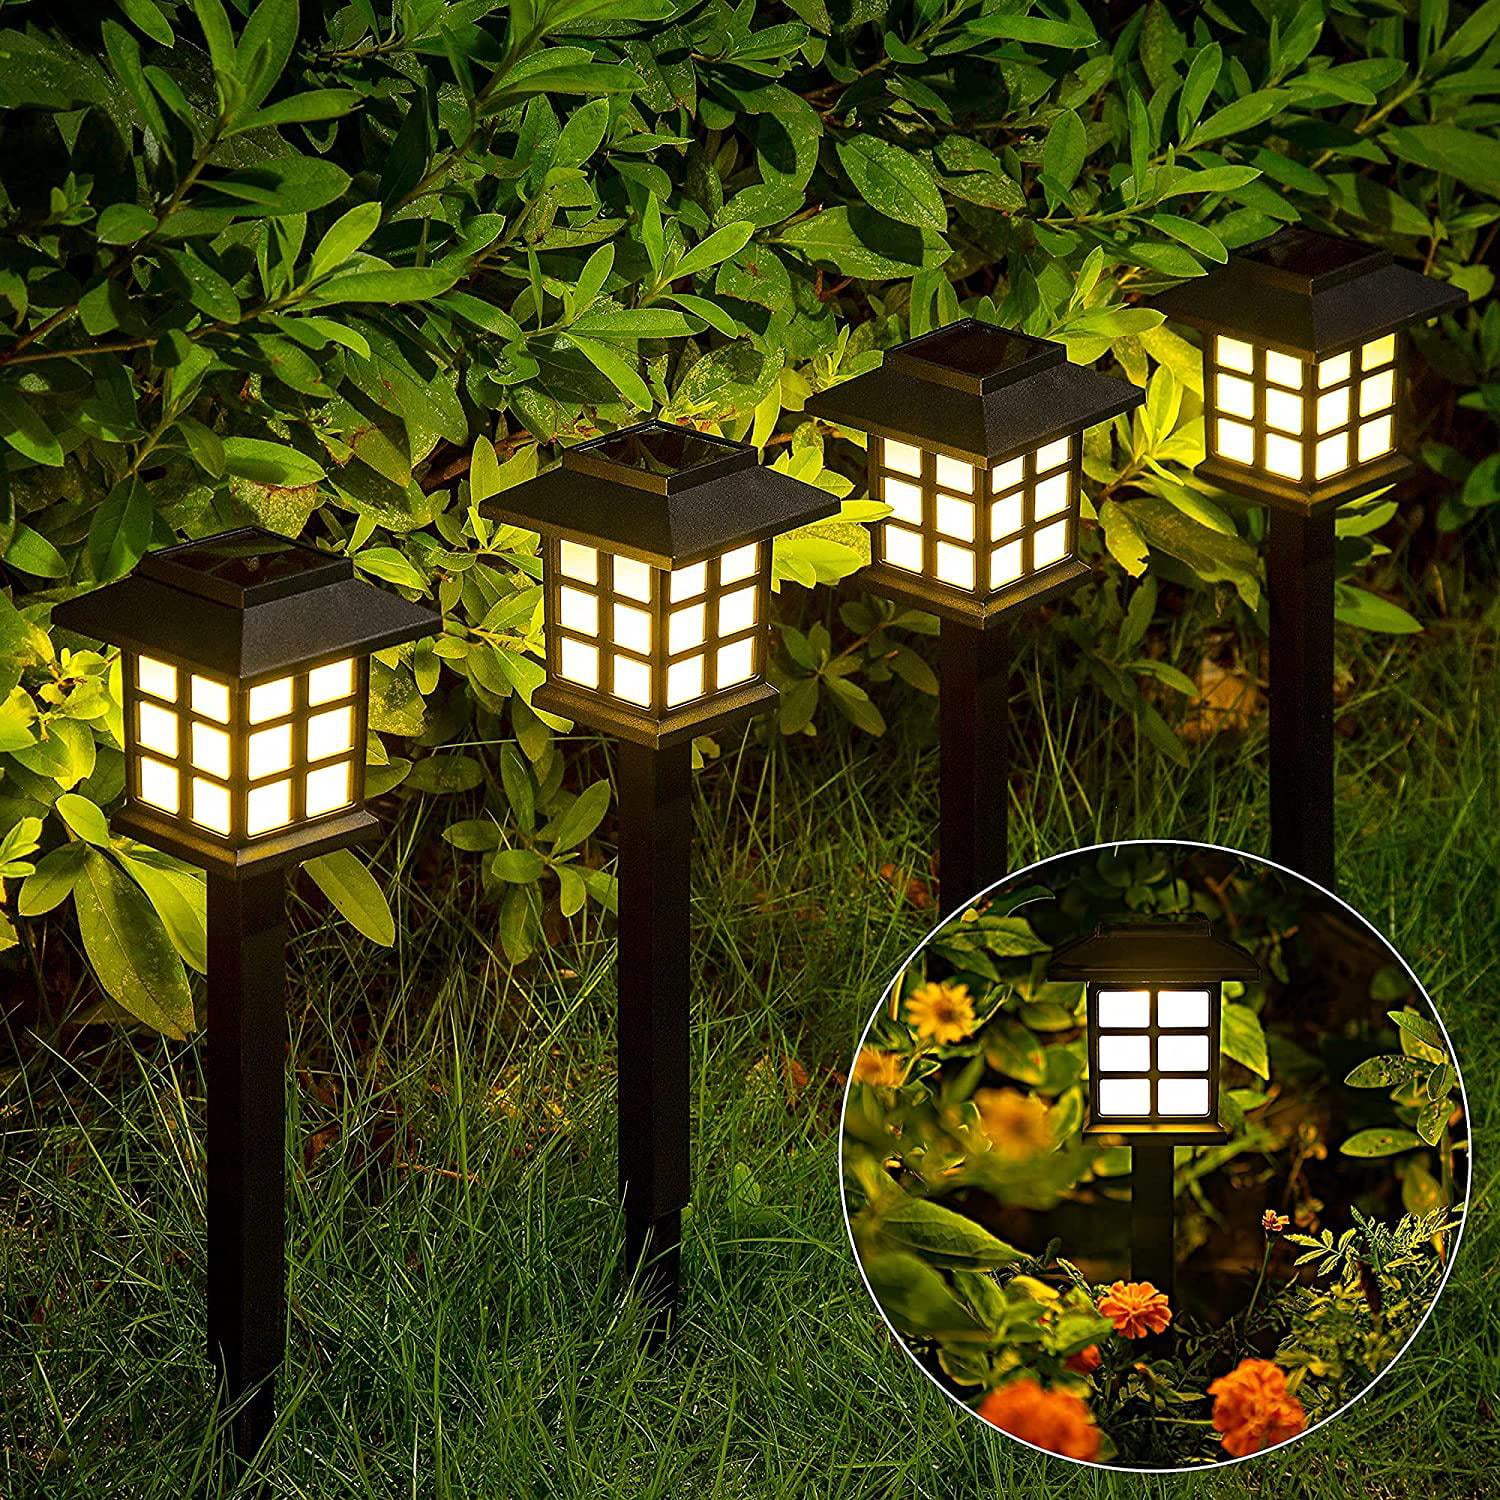 Details about   2/4Pcs LED Solar Ball Lights Waterproof Outdoor Garden Crackle Globe Stake Lamps 